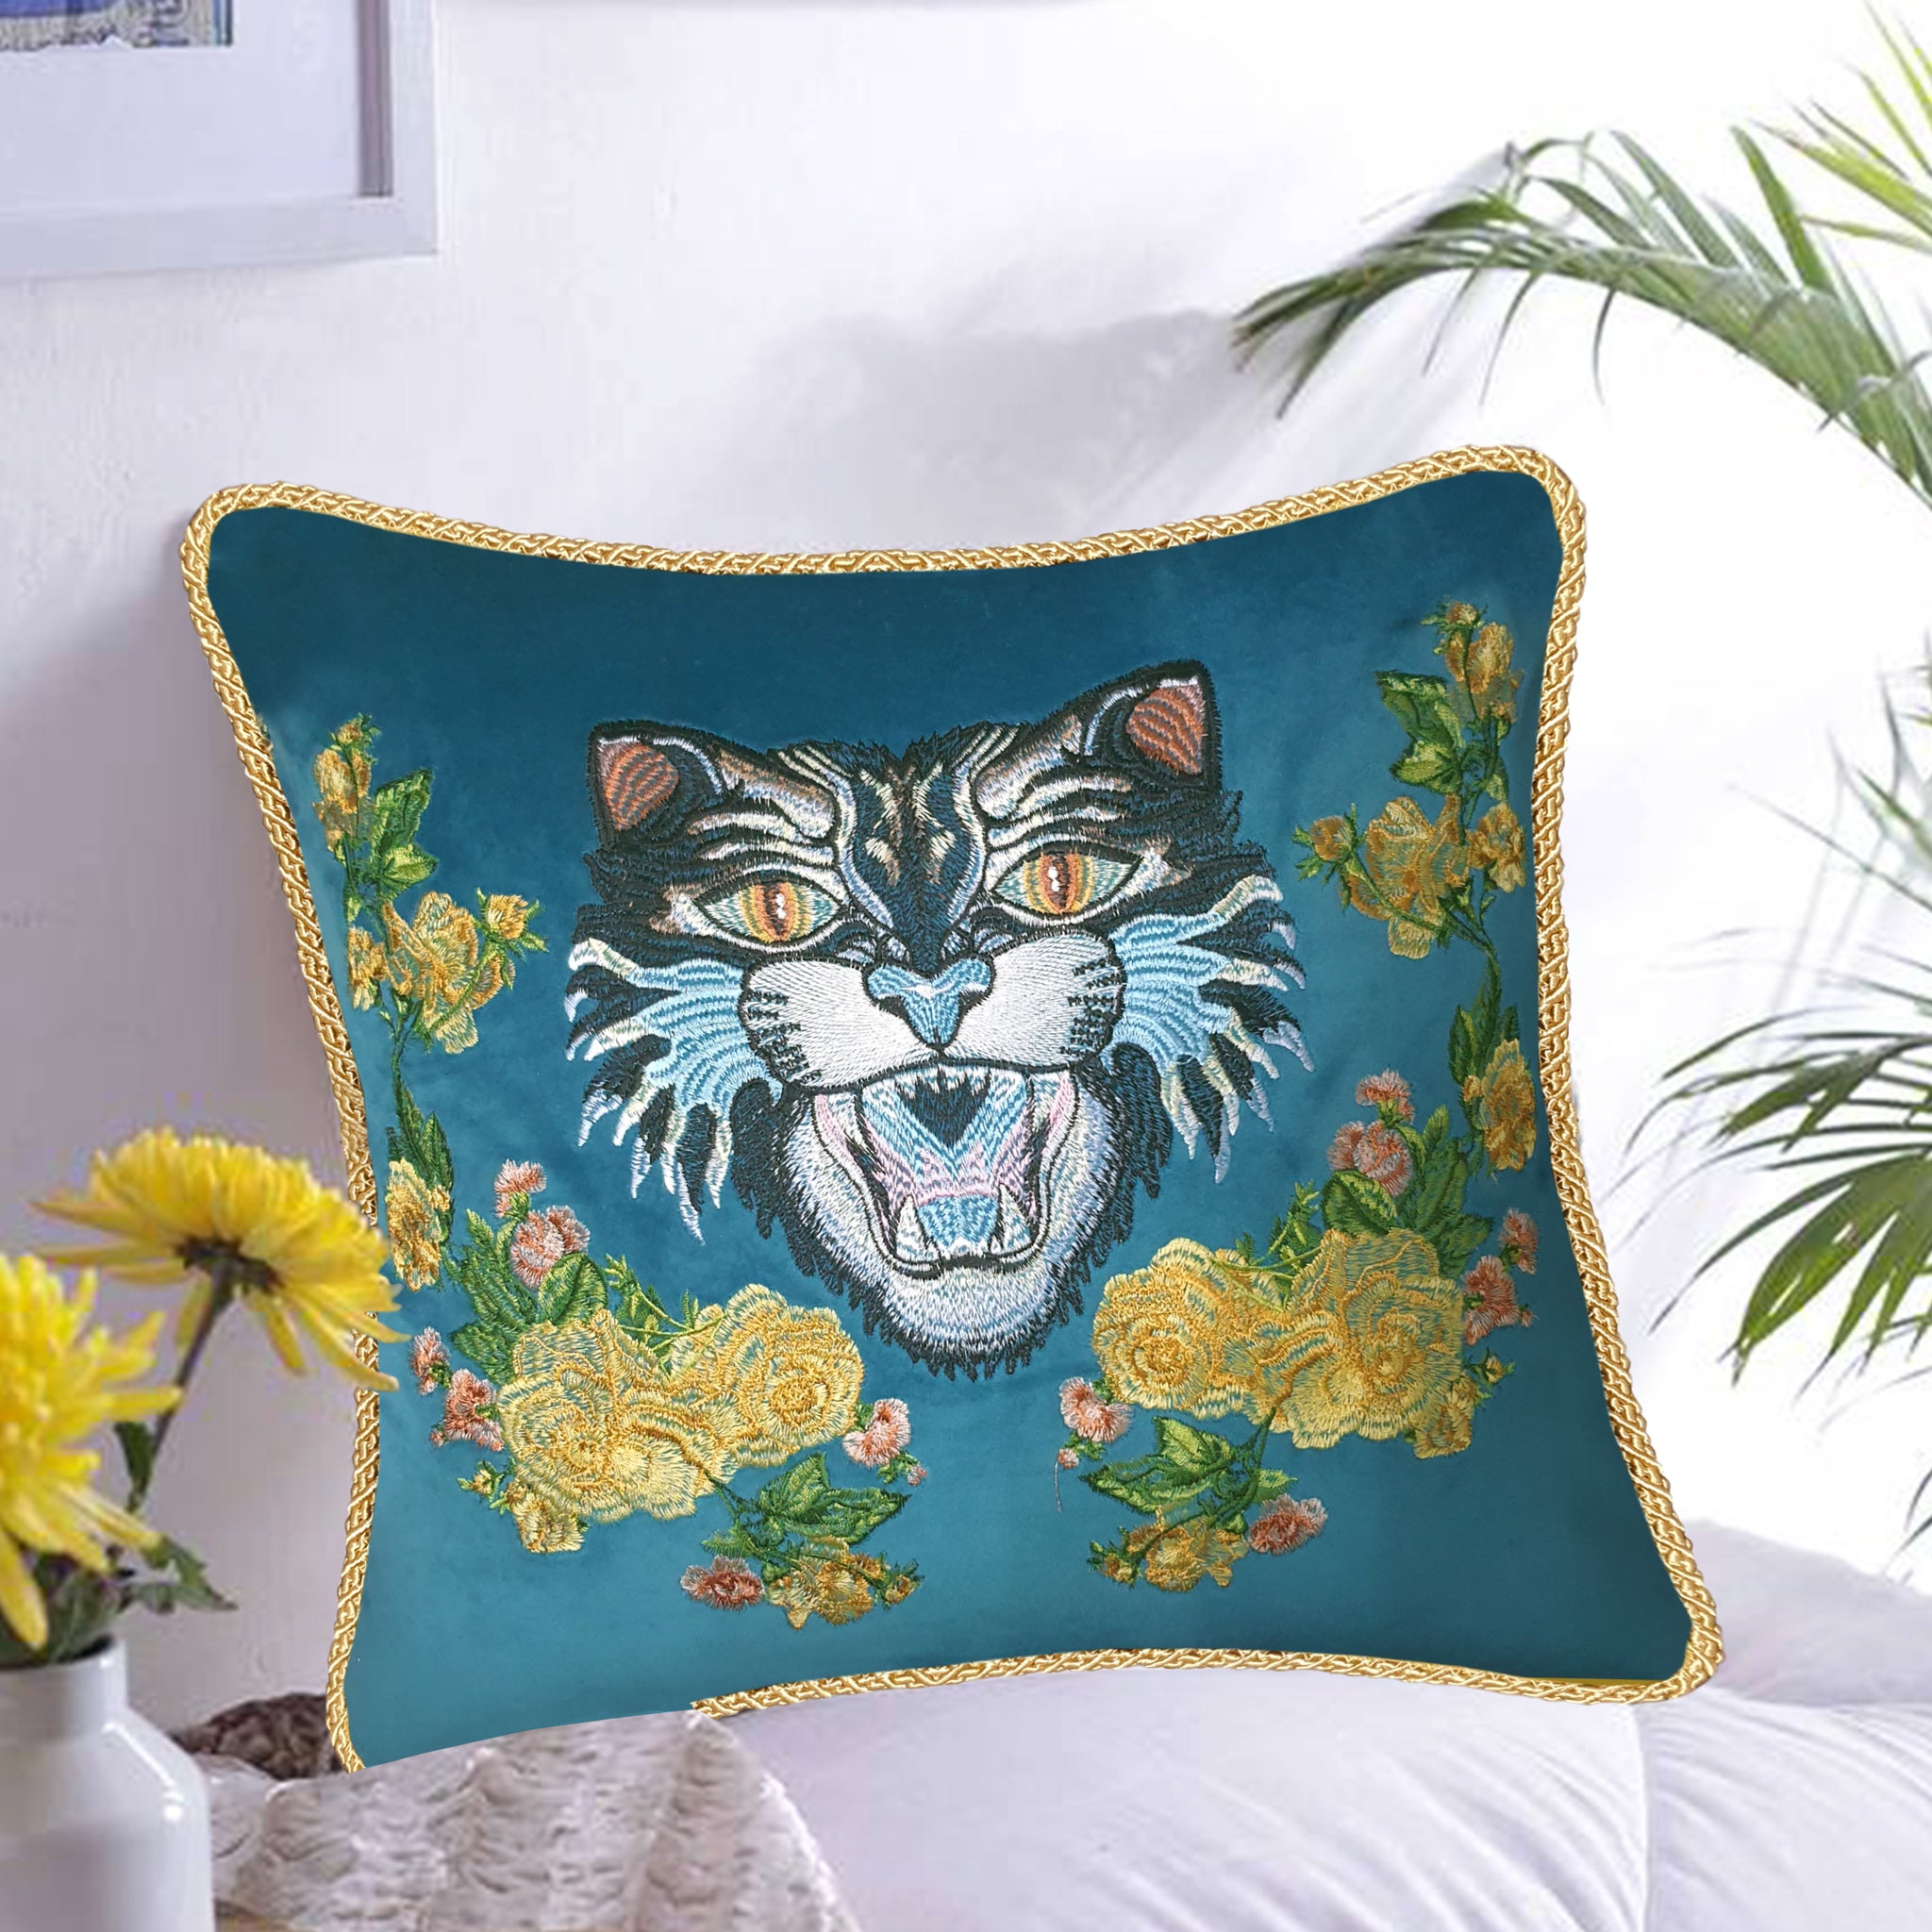 Velvet Cushion Cover Angry Cat Embroidery Decorative Pillowcase Modern Home Decor Throw Pillow for Sofa Chair Living Room 45x45 cm